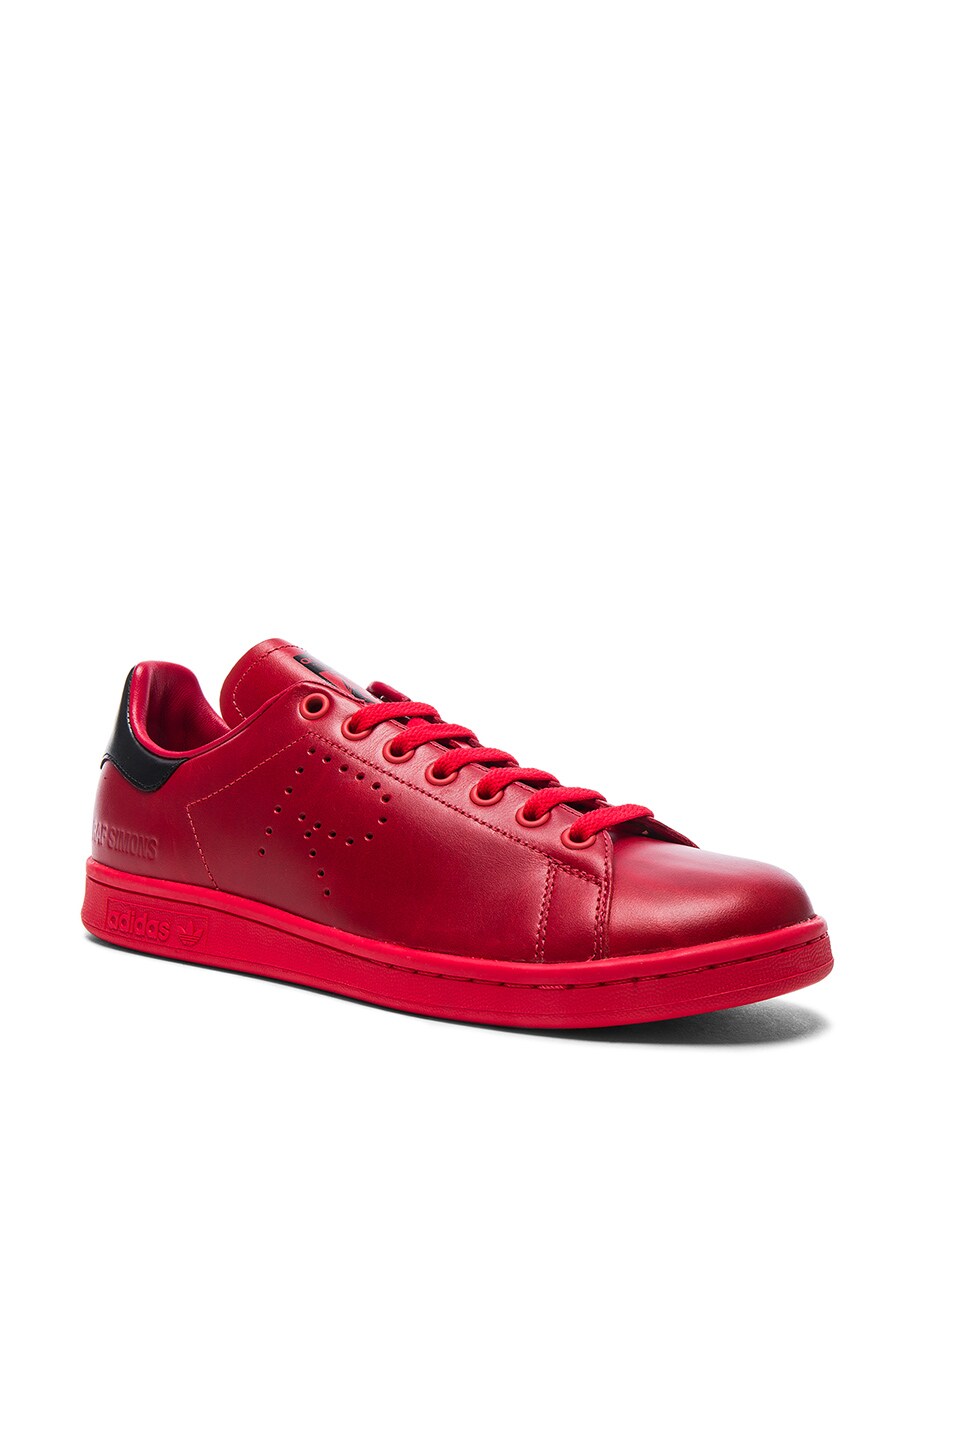 Image 1 of Raf Simons x Adidas Leather Stan Smith Sneakers in Tomato & Black